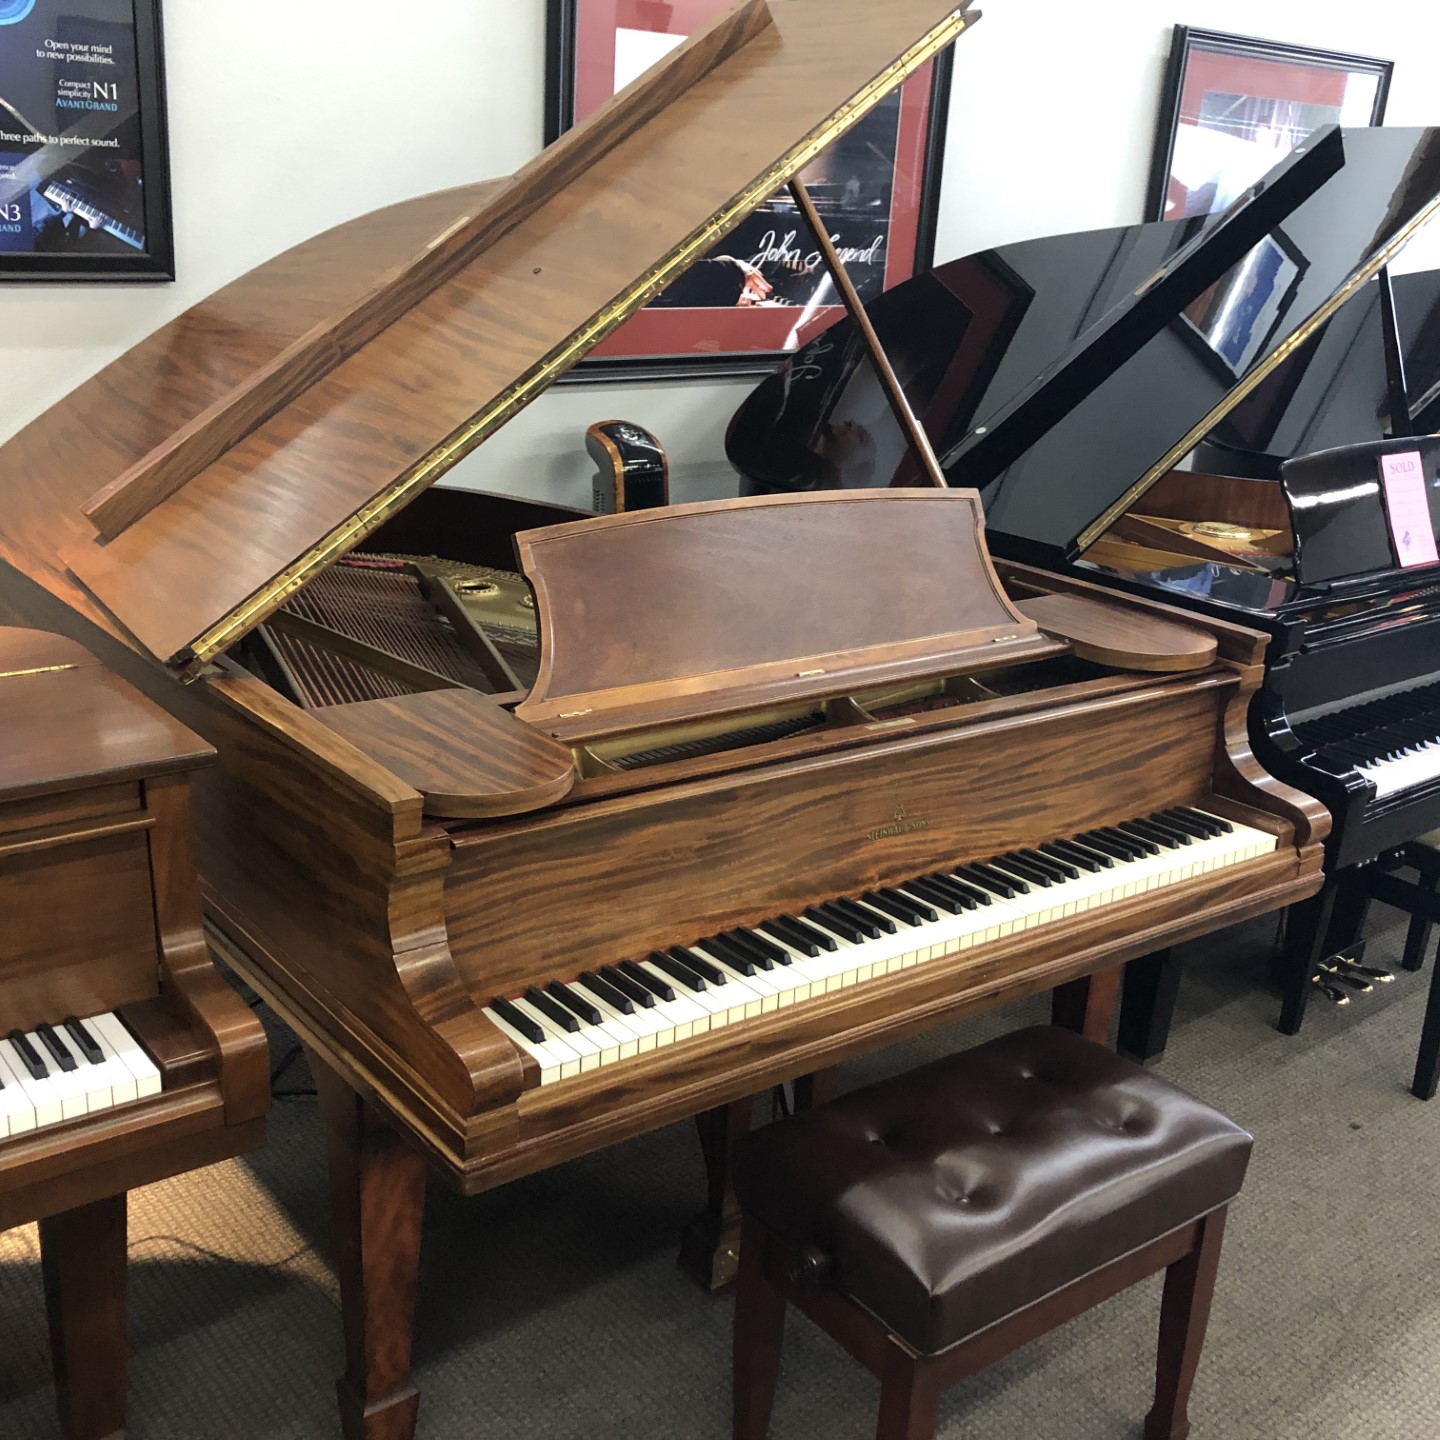 Image forSteinway & Sons Model “A” w PianoDisc Player